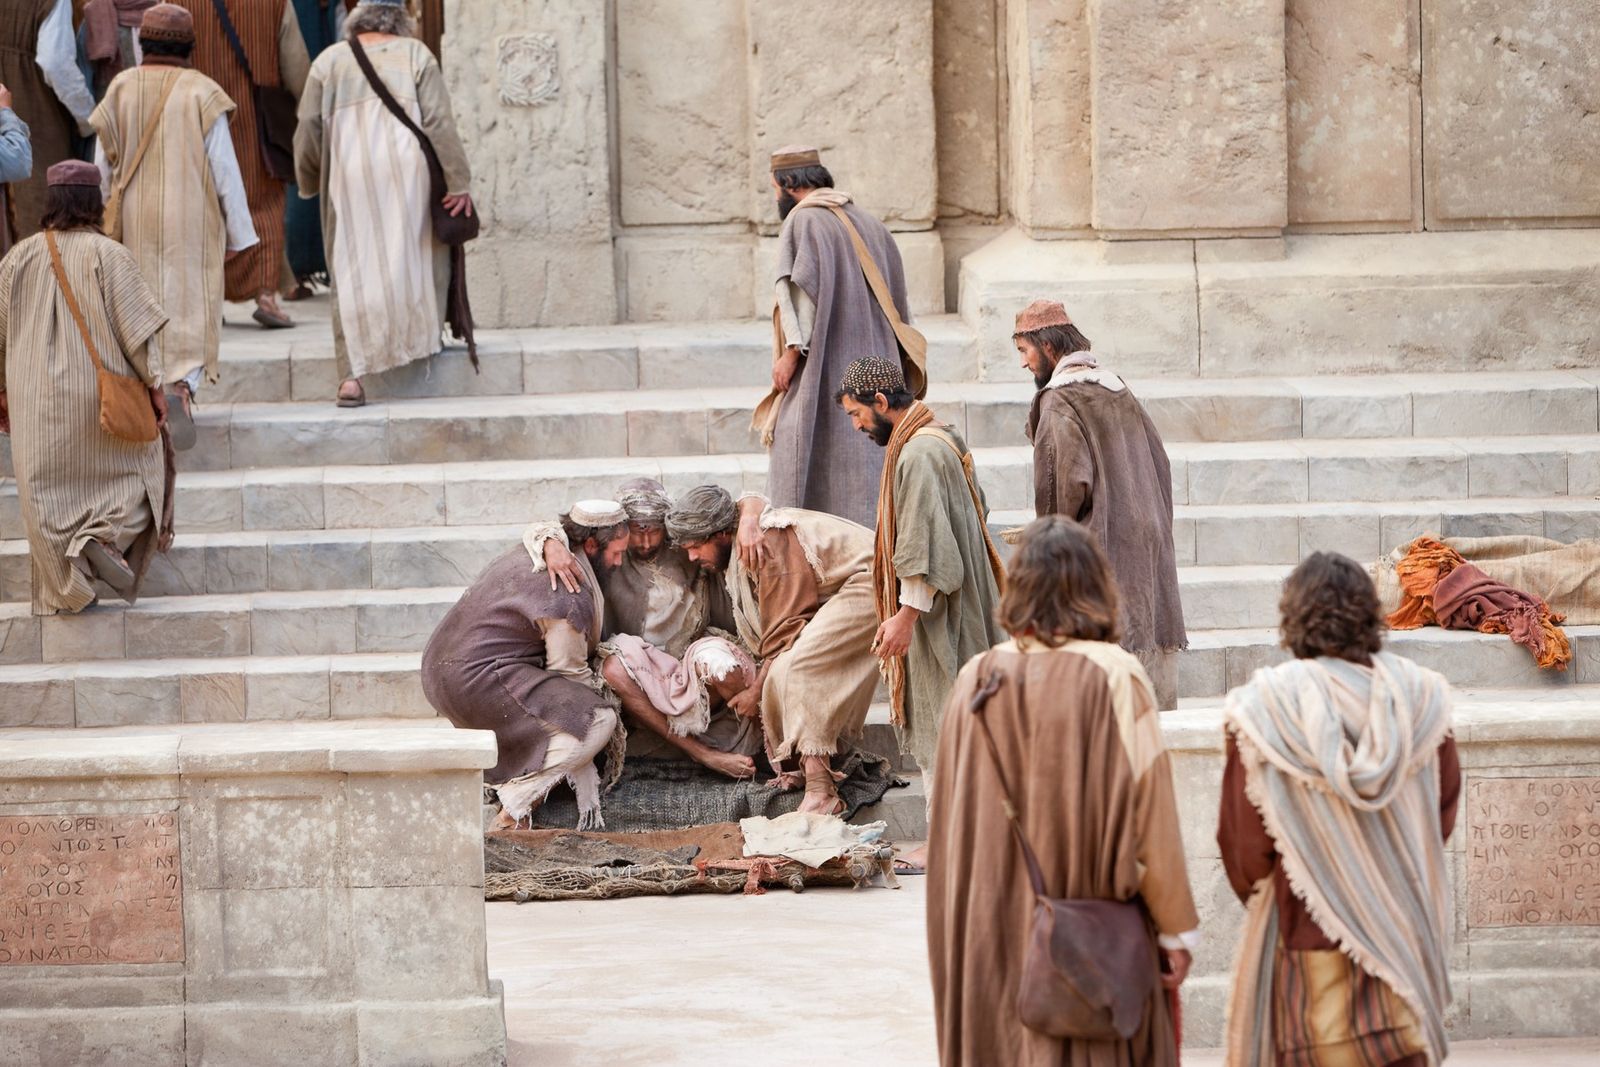 Men carry a cripple since birth and set him on the steps.